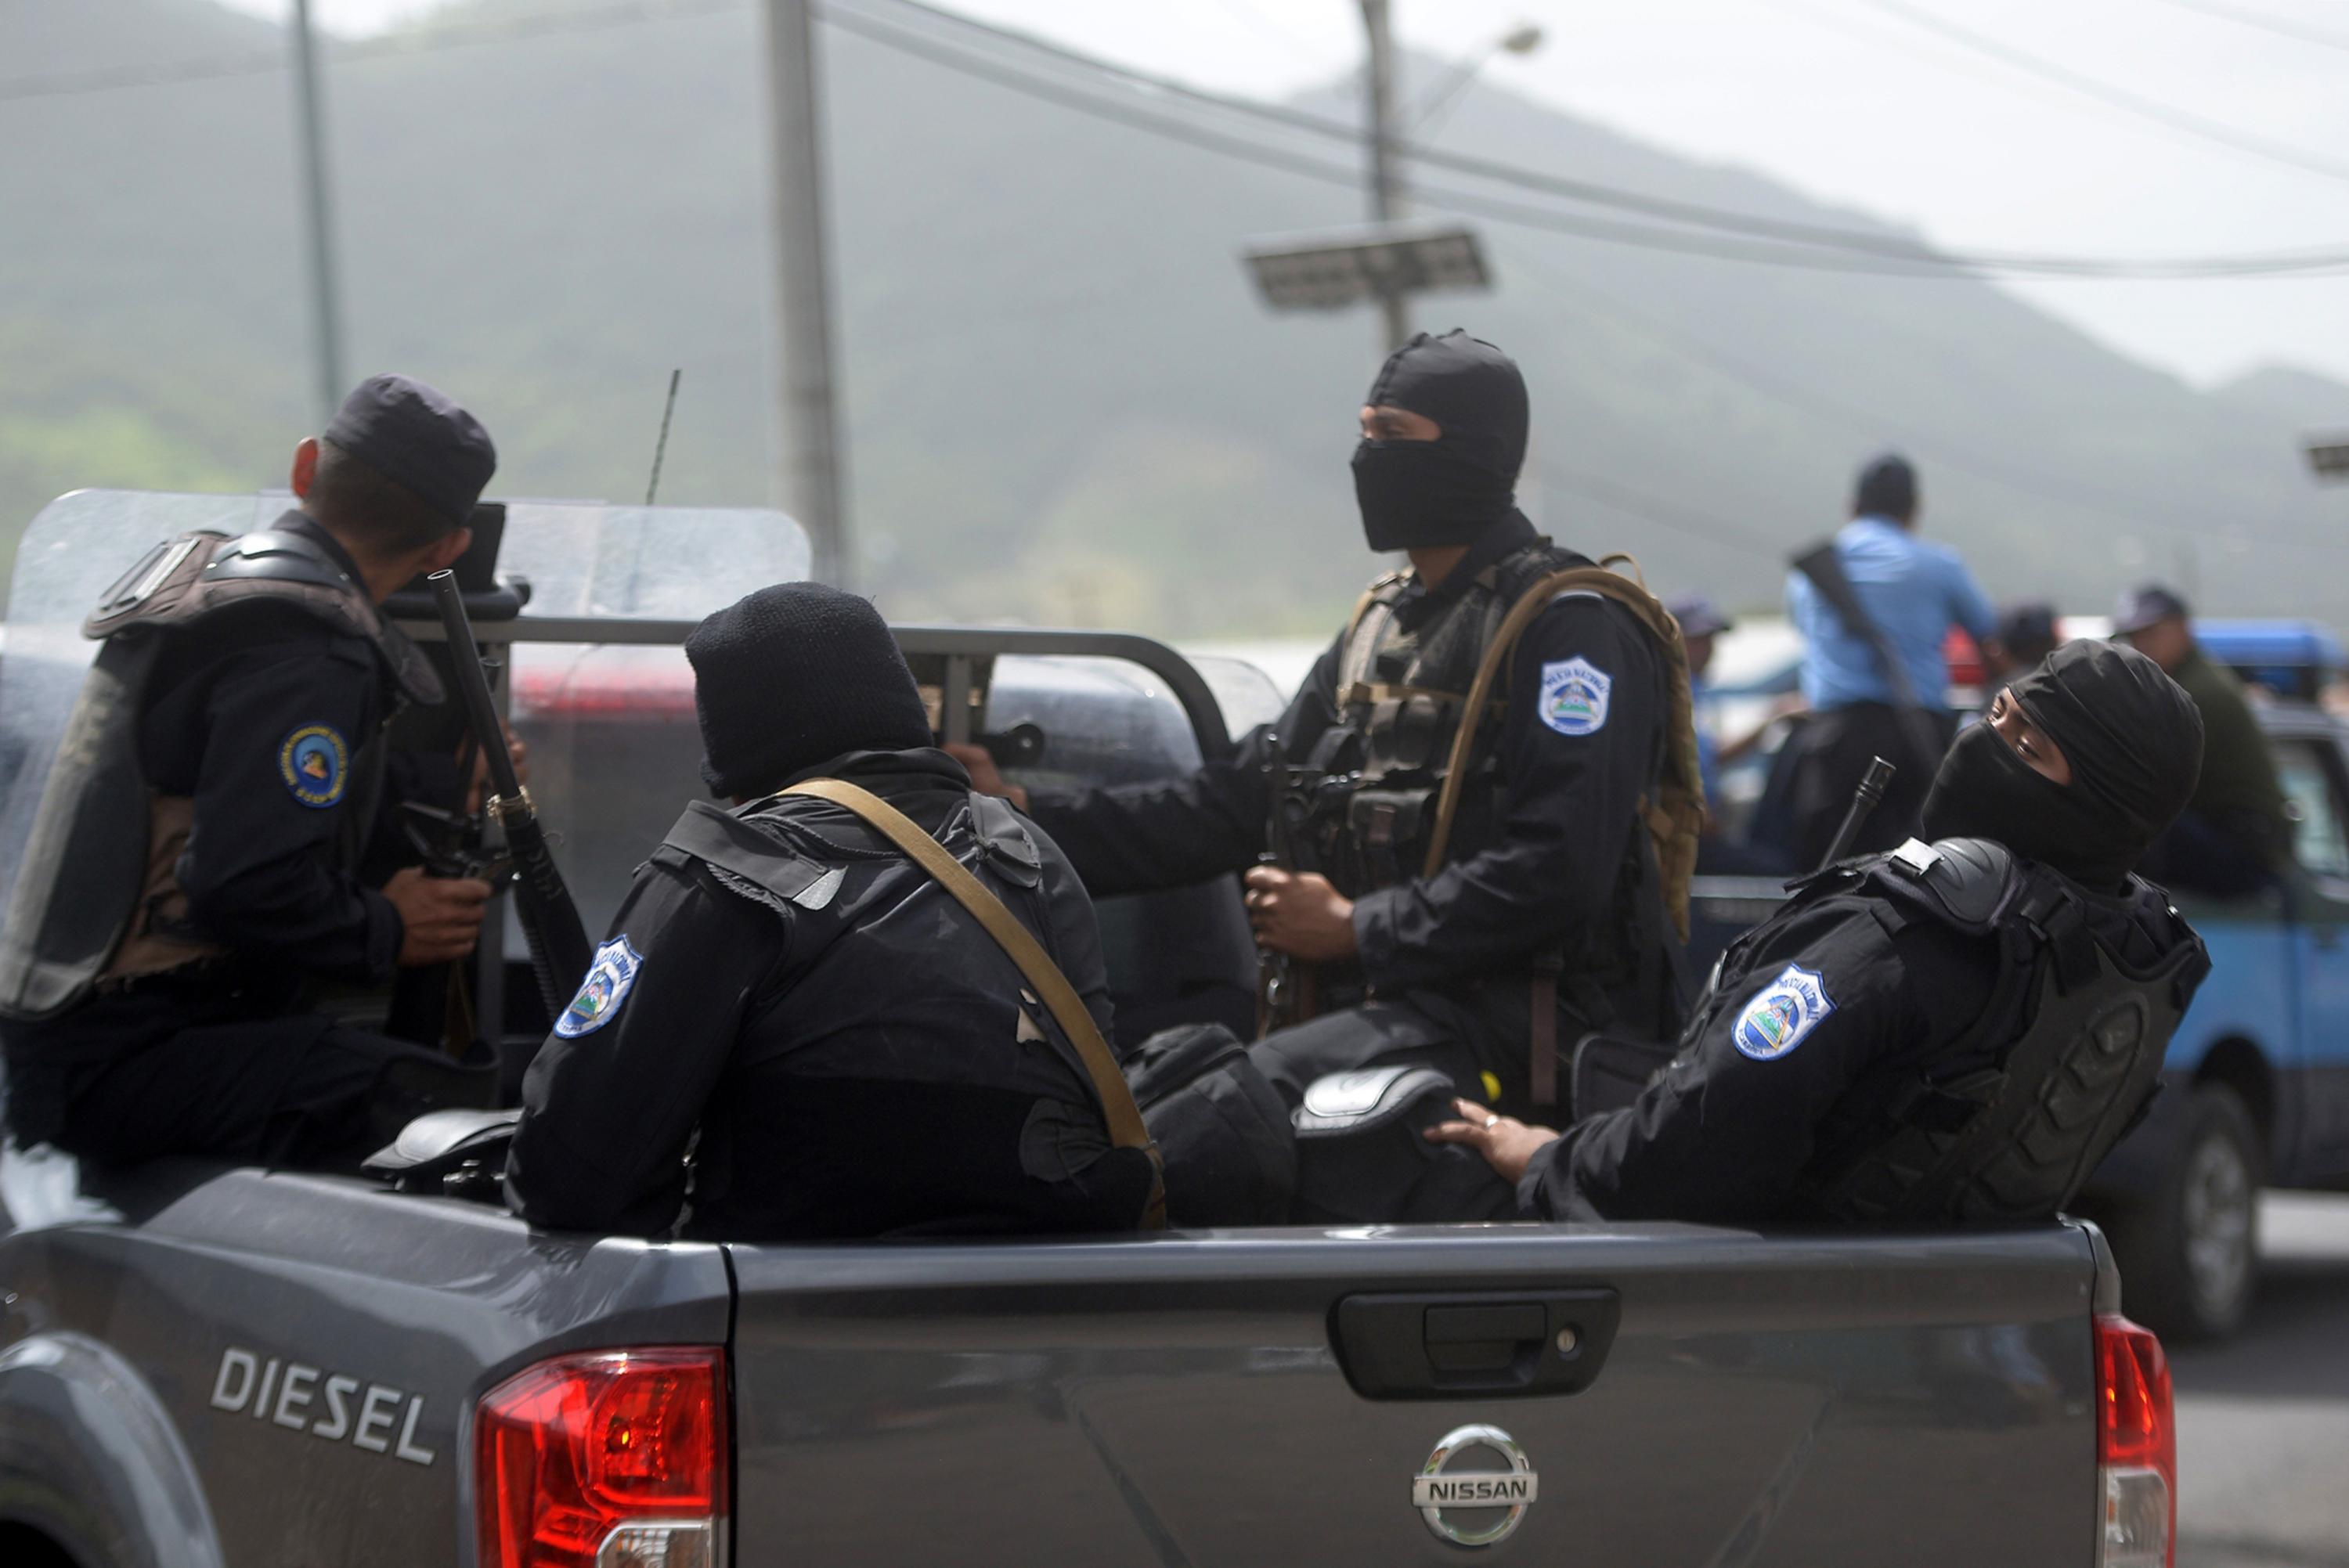 Nicaraguan Special Forces on patrol following clashes with anti-government protesters in the Sandino neighborhood in Jinotega, Nicaragua, July 24, 2018. Photo Marvin Recinos/AFP